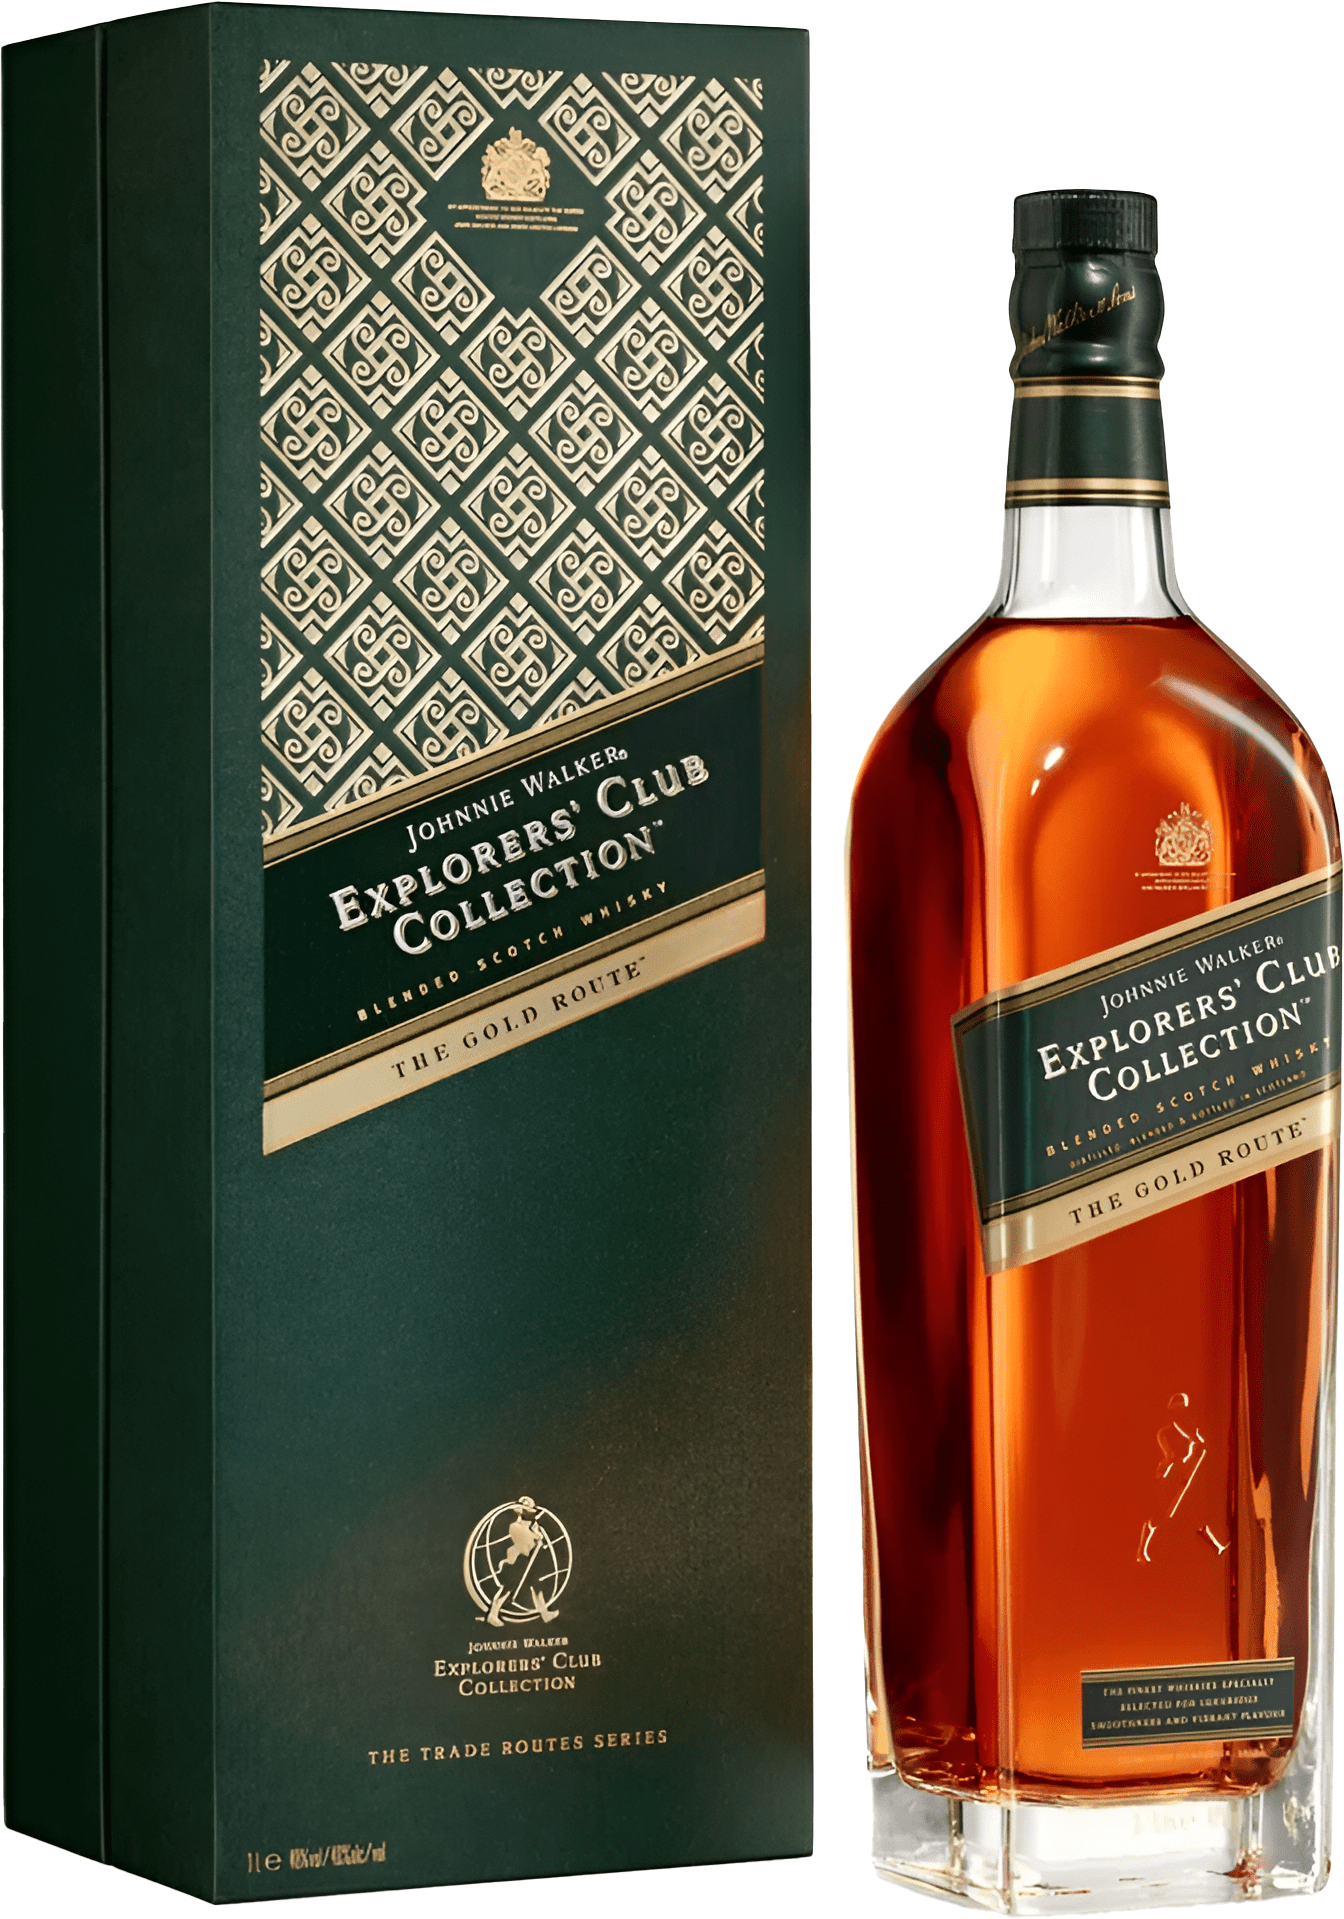 Johnnie Walker Explorer's Club Collection The Gold Route 40% 1l